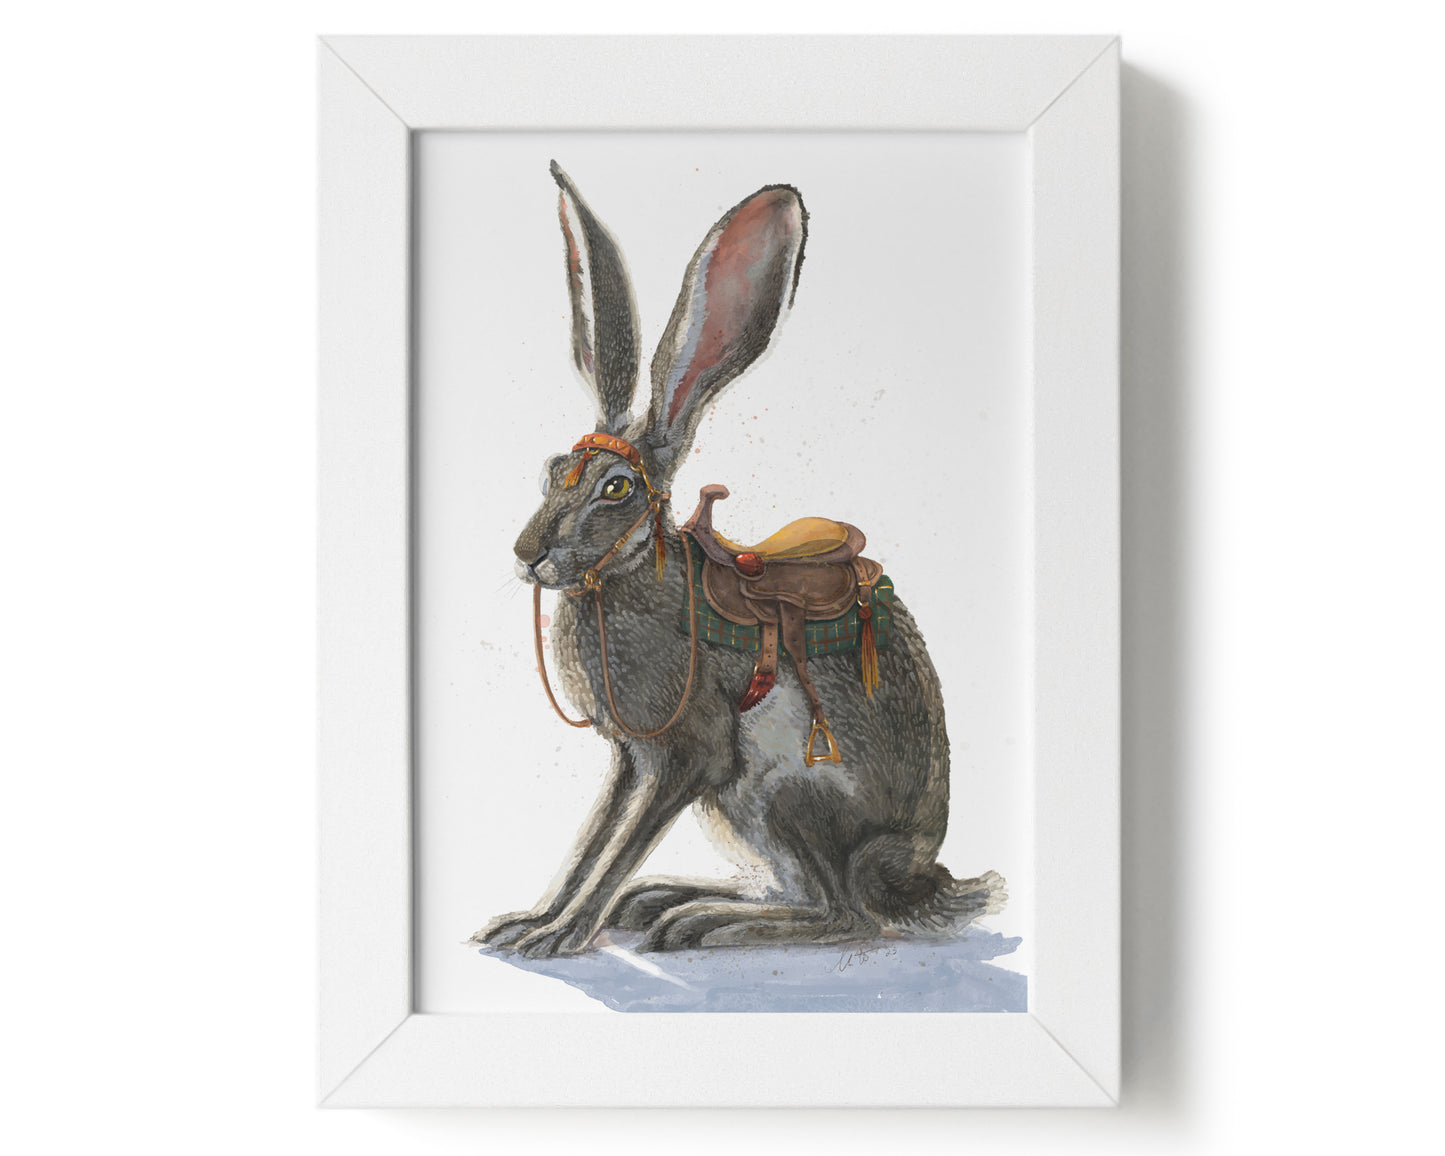 "Gallop of the Hare" by Catherine Hébert - Watercolour Hare Giclee Art Print - 5"x7" size